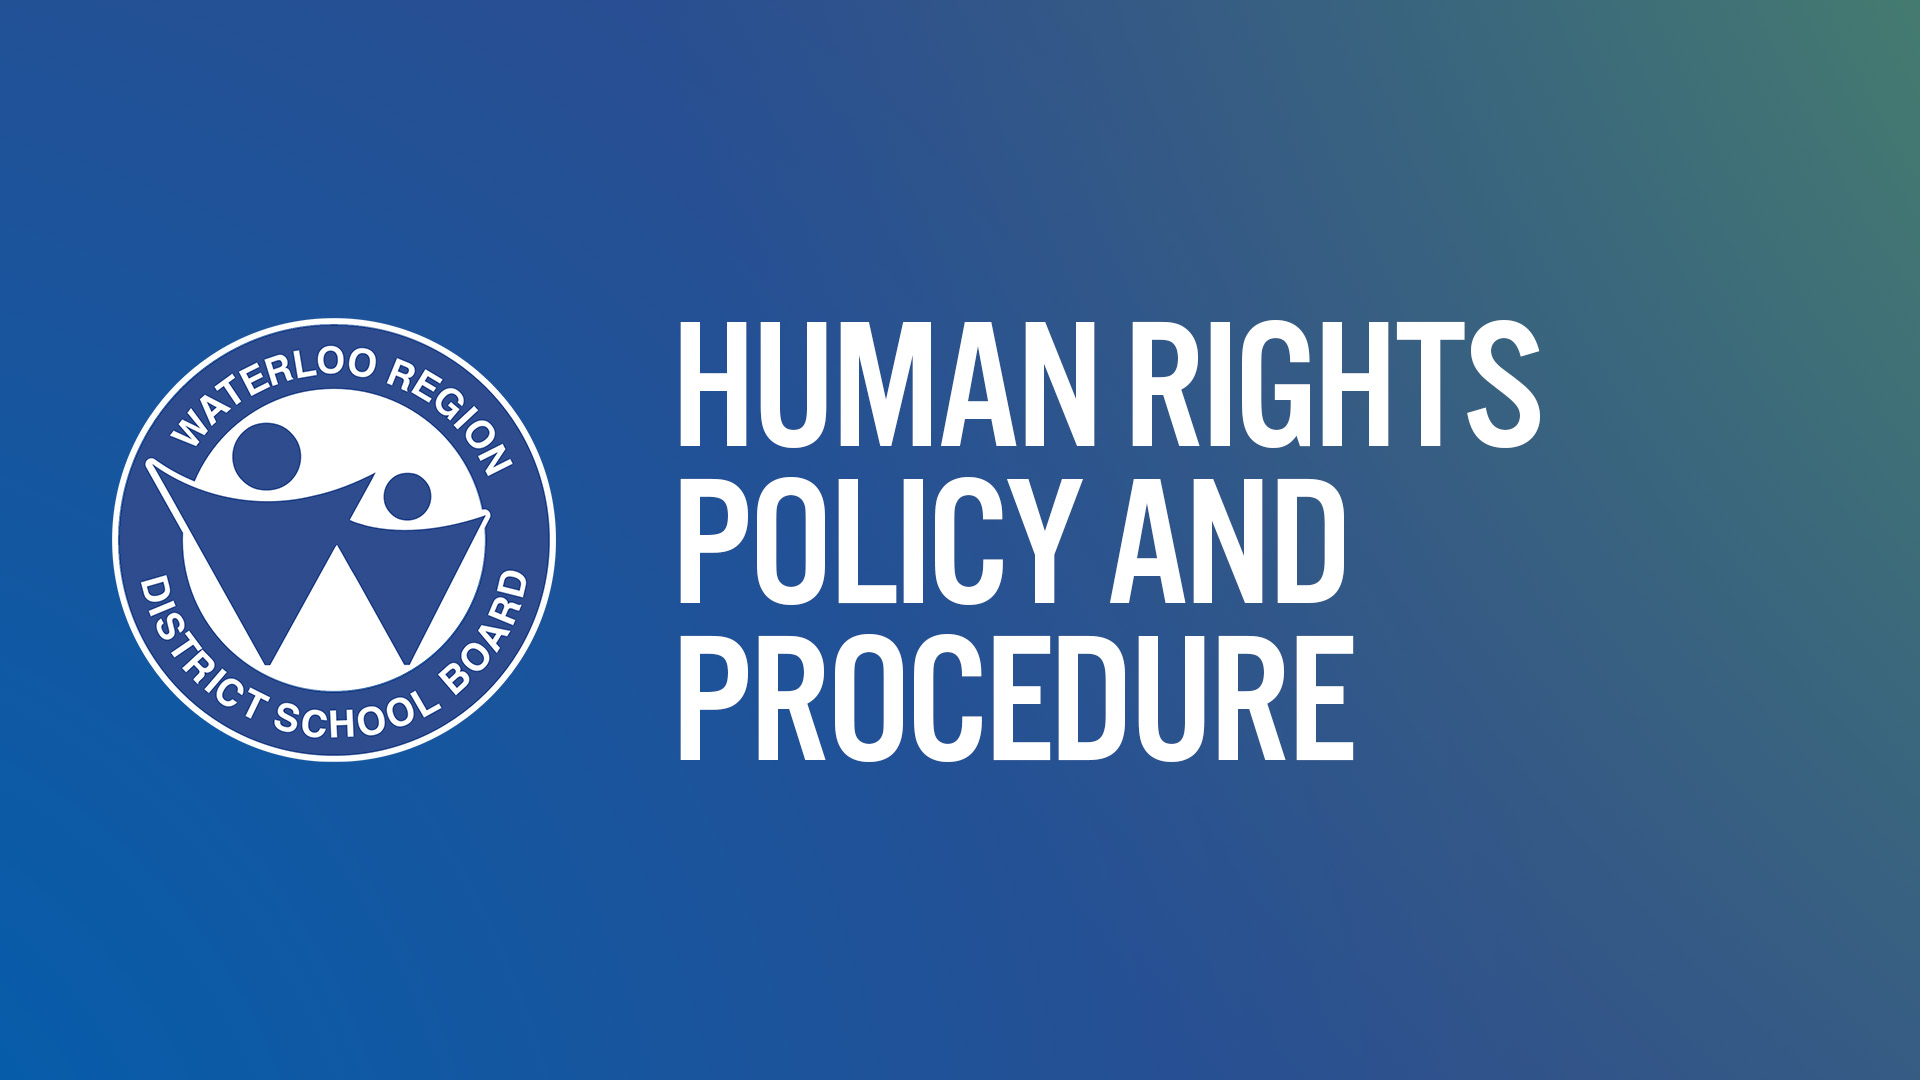 Human Rights Policy and Procedure